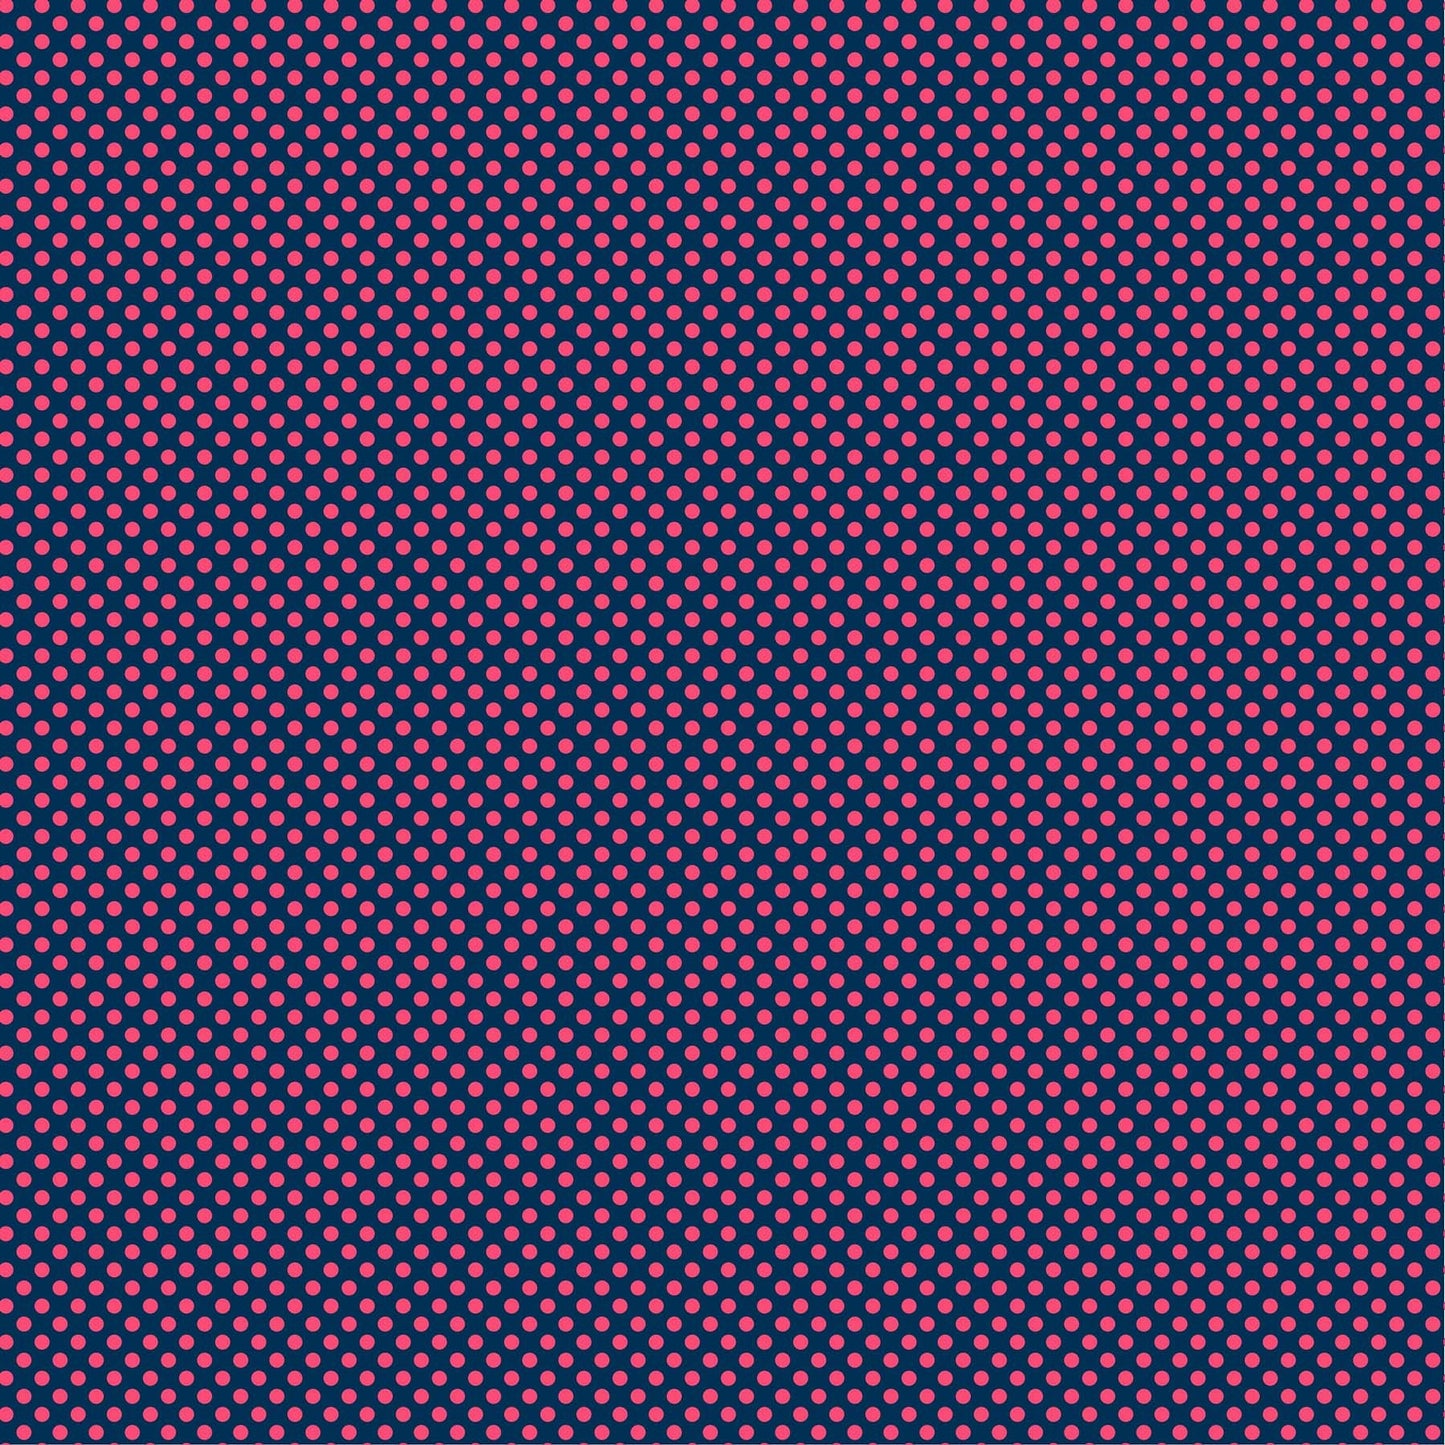 Call Me by Melanie Samra Dots on Blue 22485-49 Cotton Woven Fabric